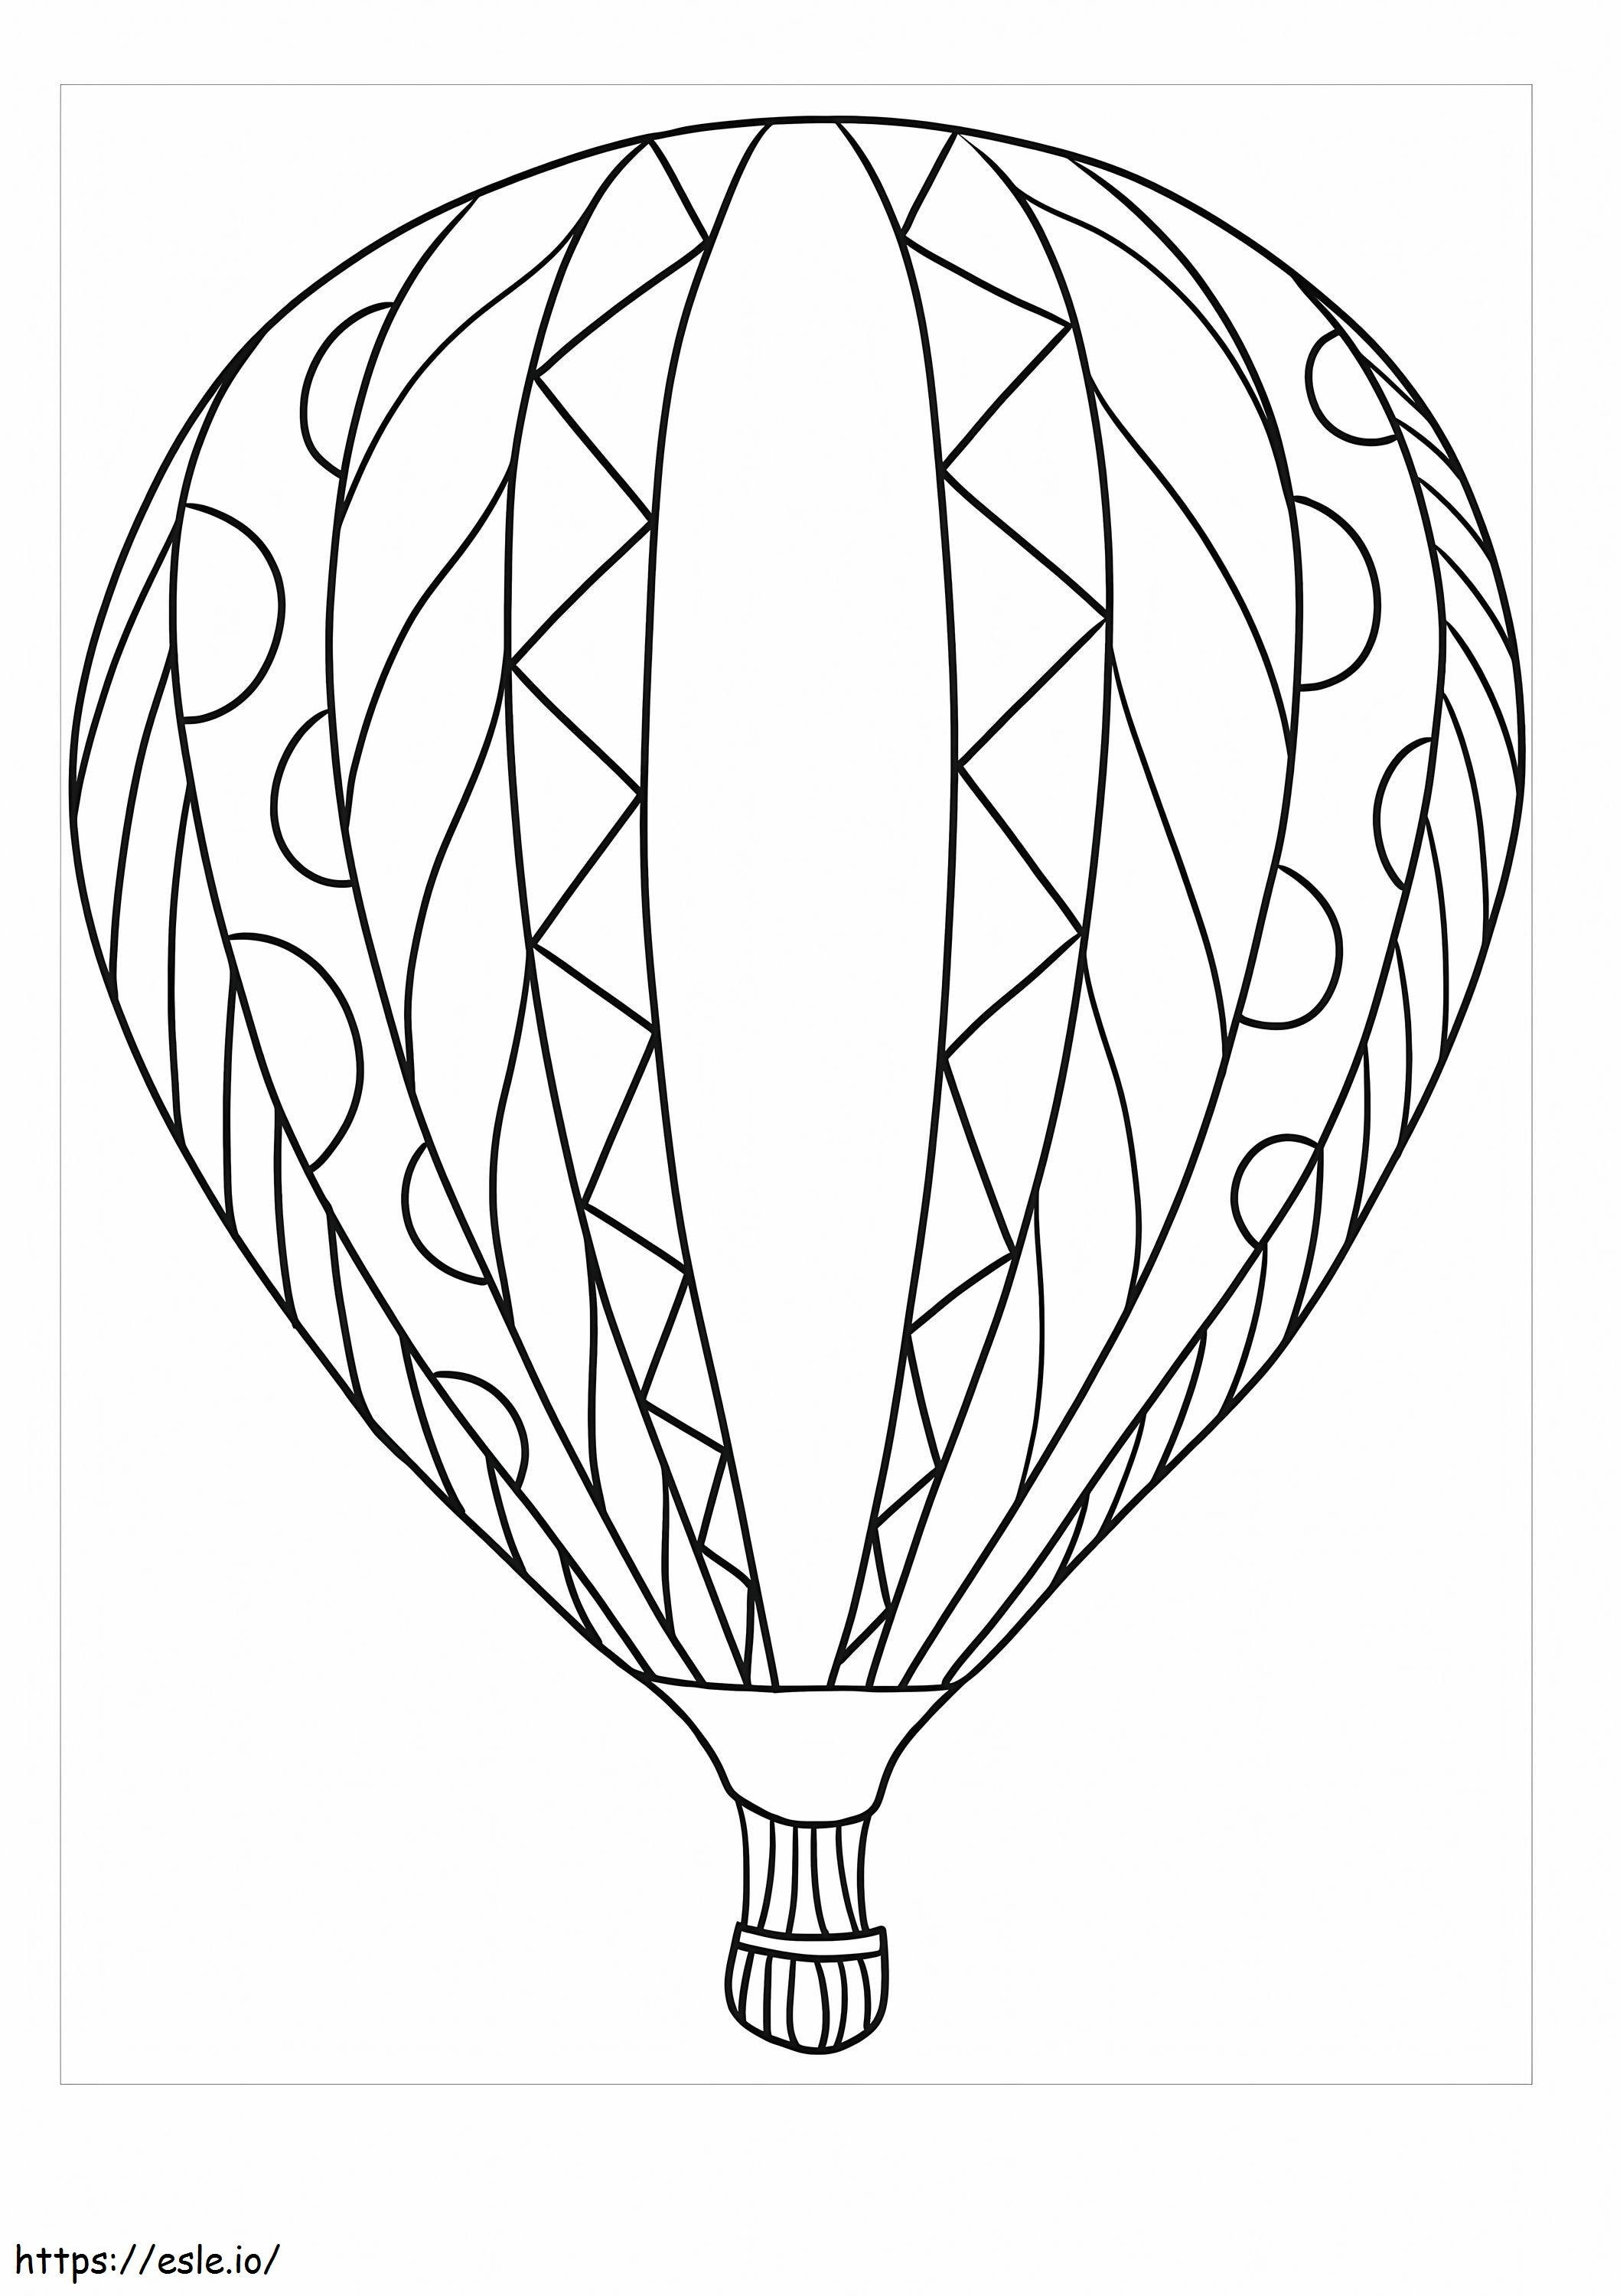 Adult Hot Air Balloon coloring page